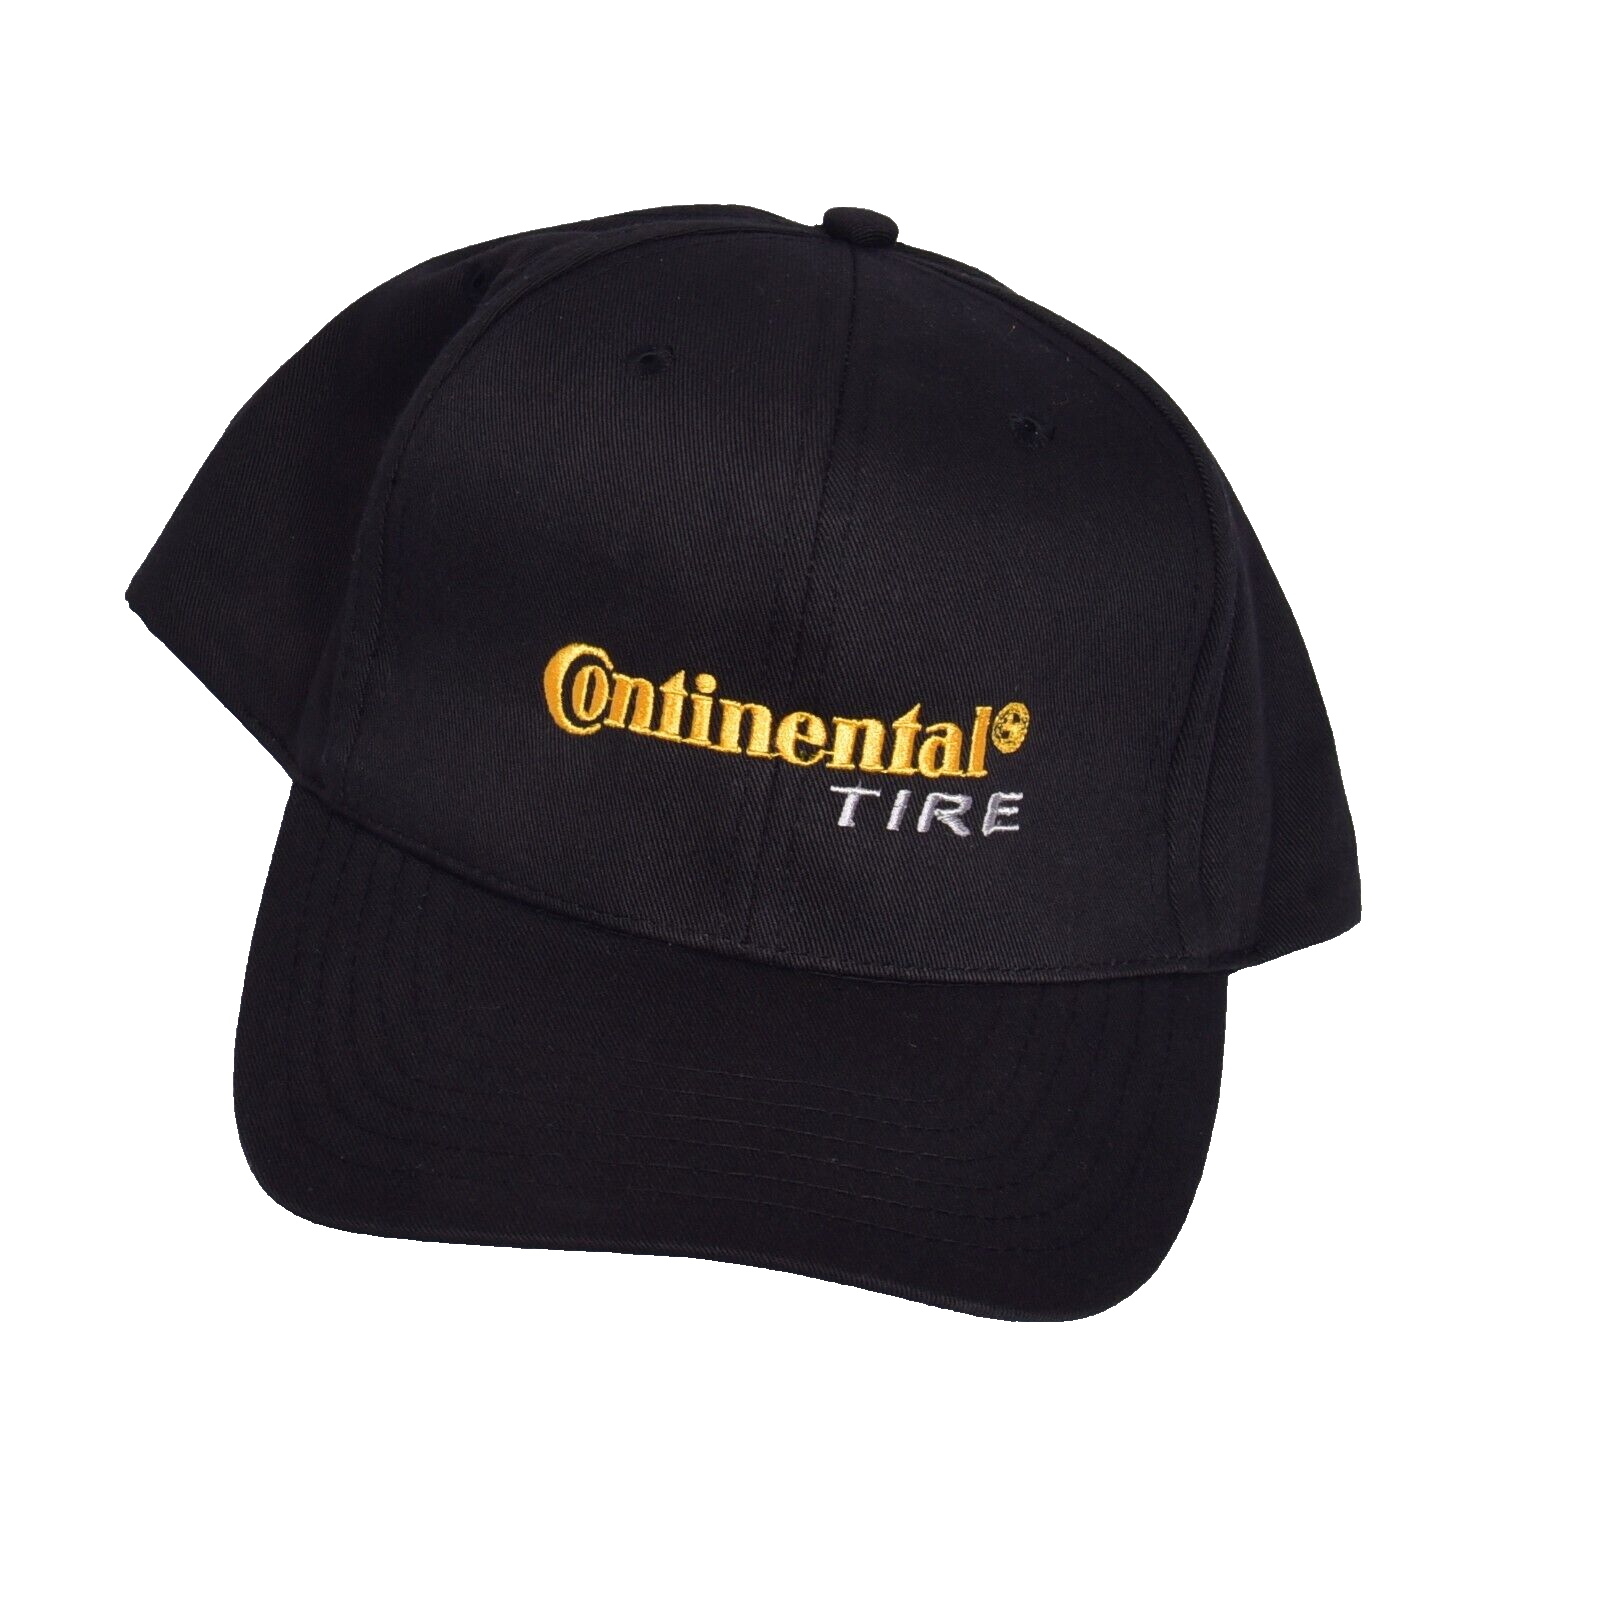 Primary image for Continental Tire Hat Black Stitched Logo Adjustable Baseball Cap Racing